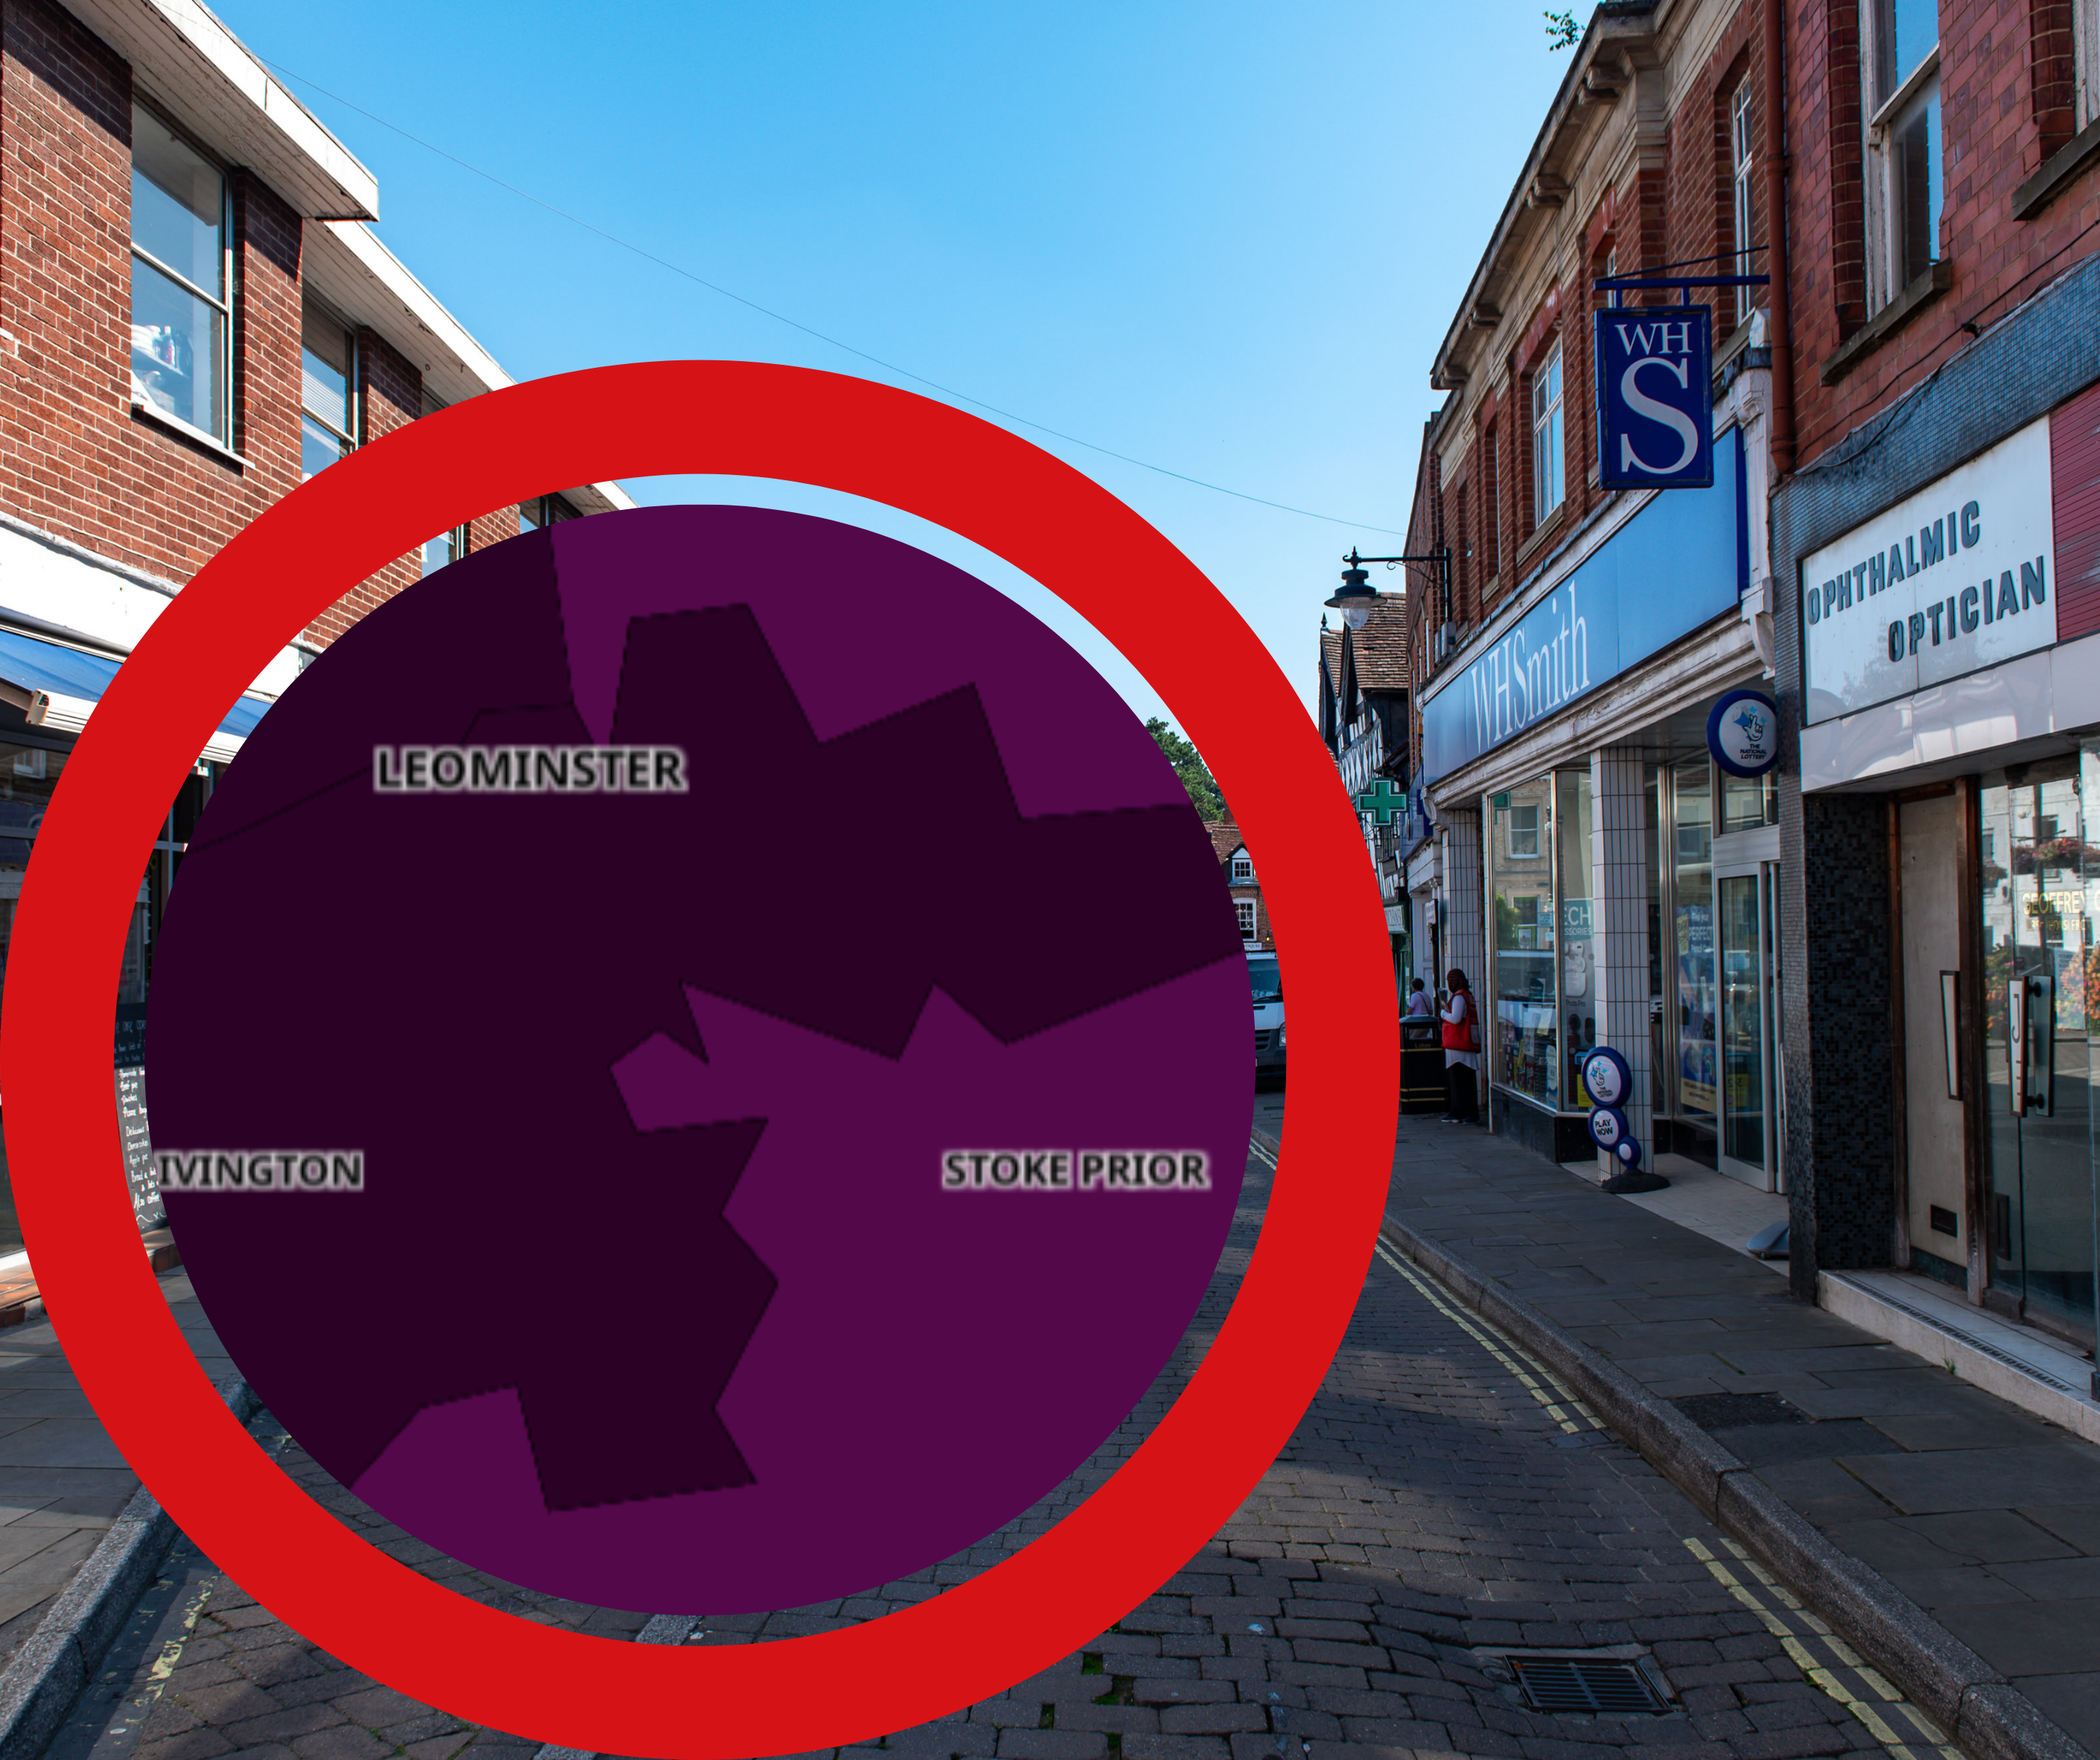 NEWS | One area of Leominster now has one of the highest COVID-19 infection rates in England